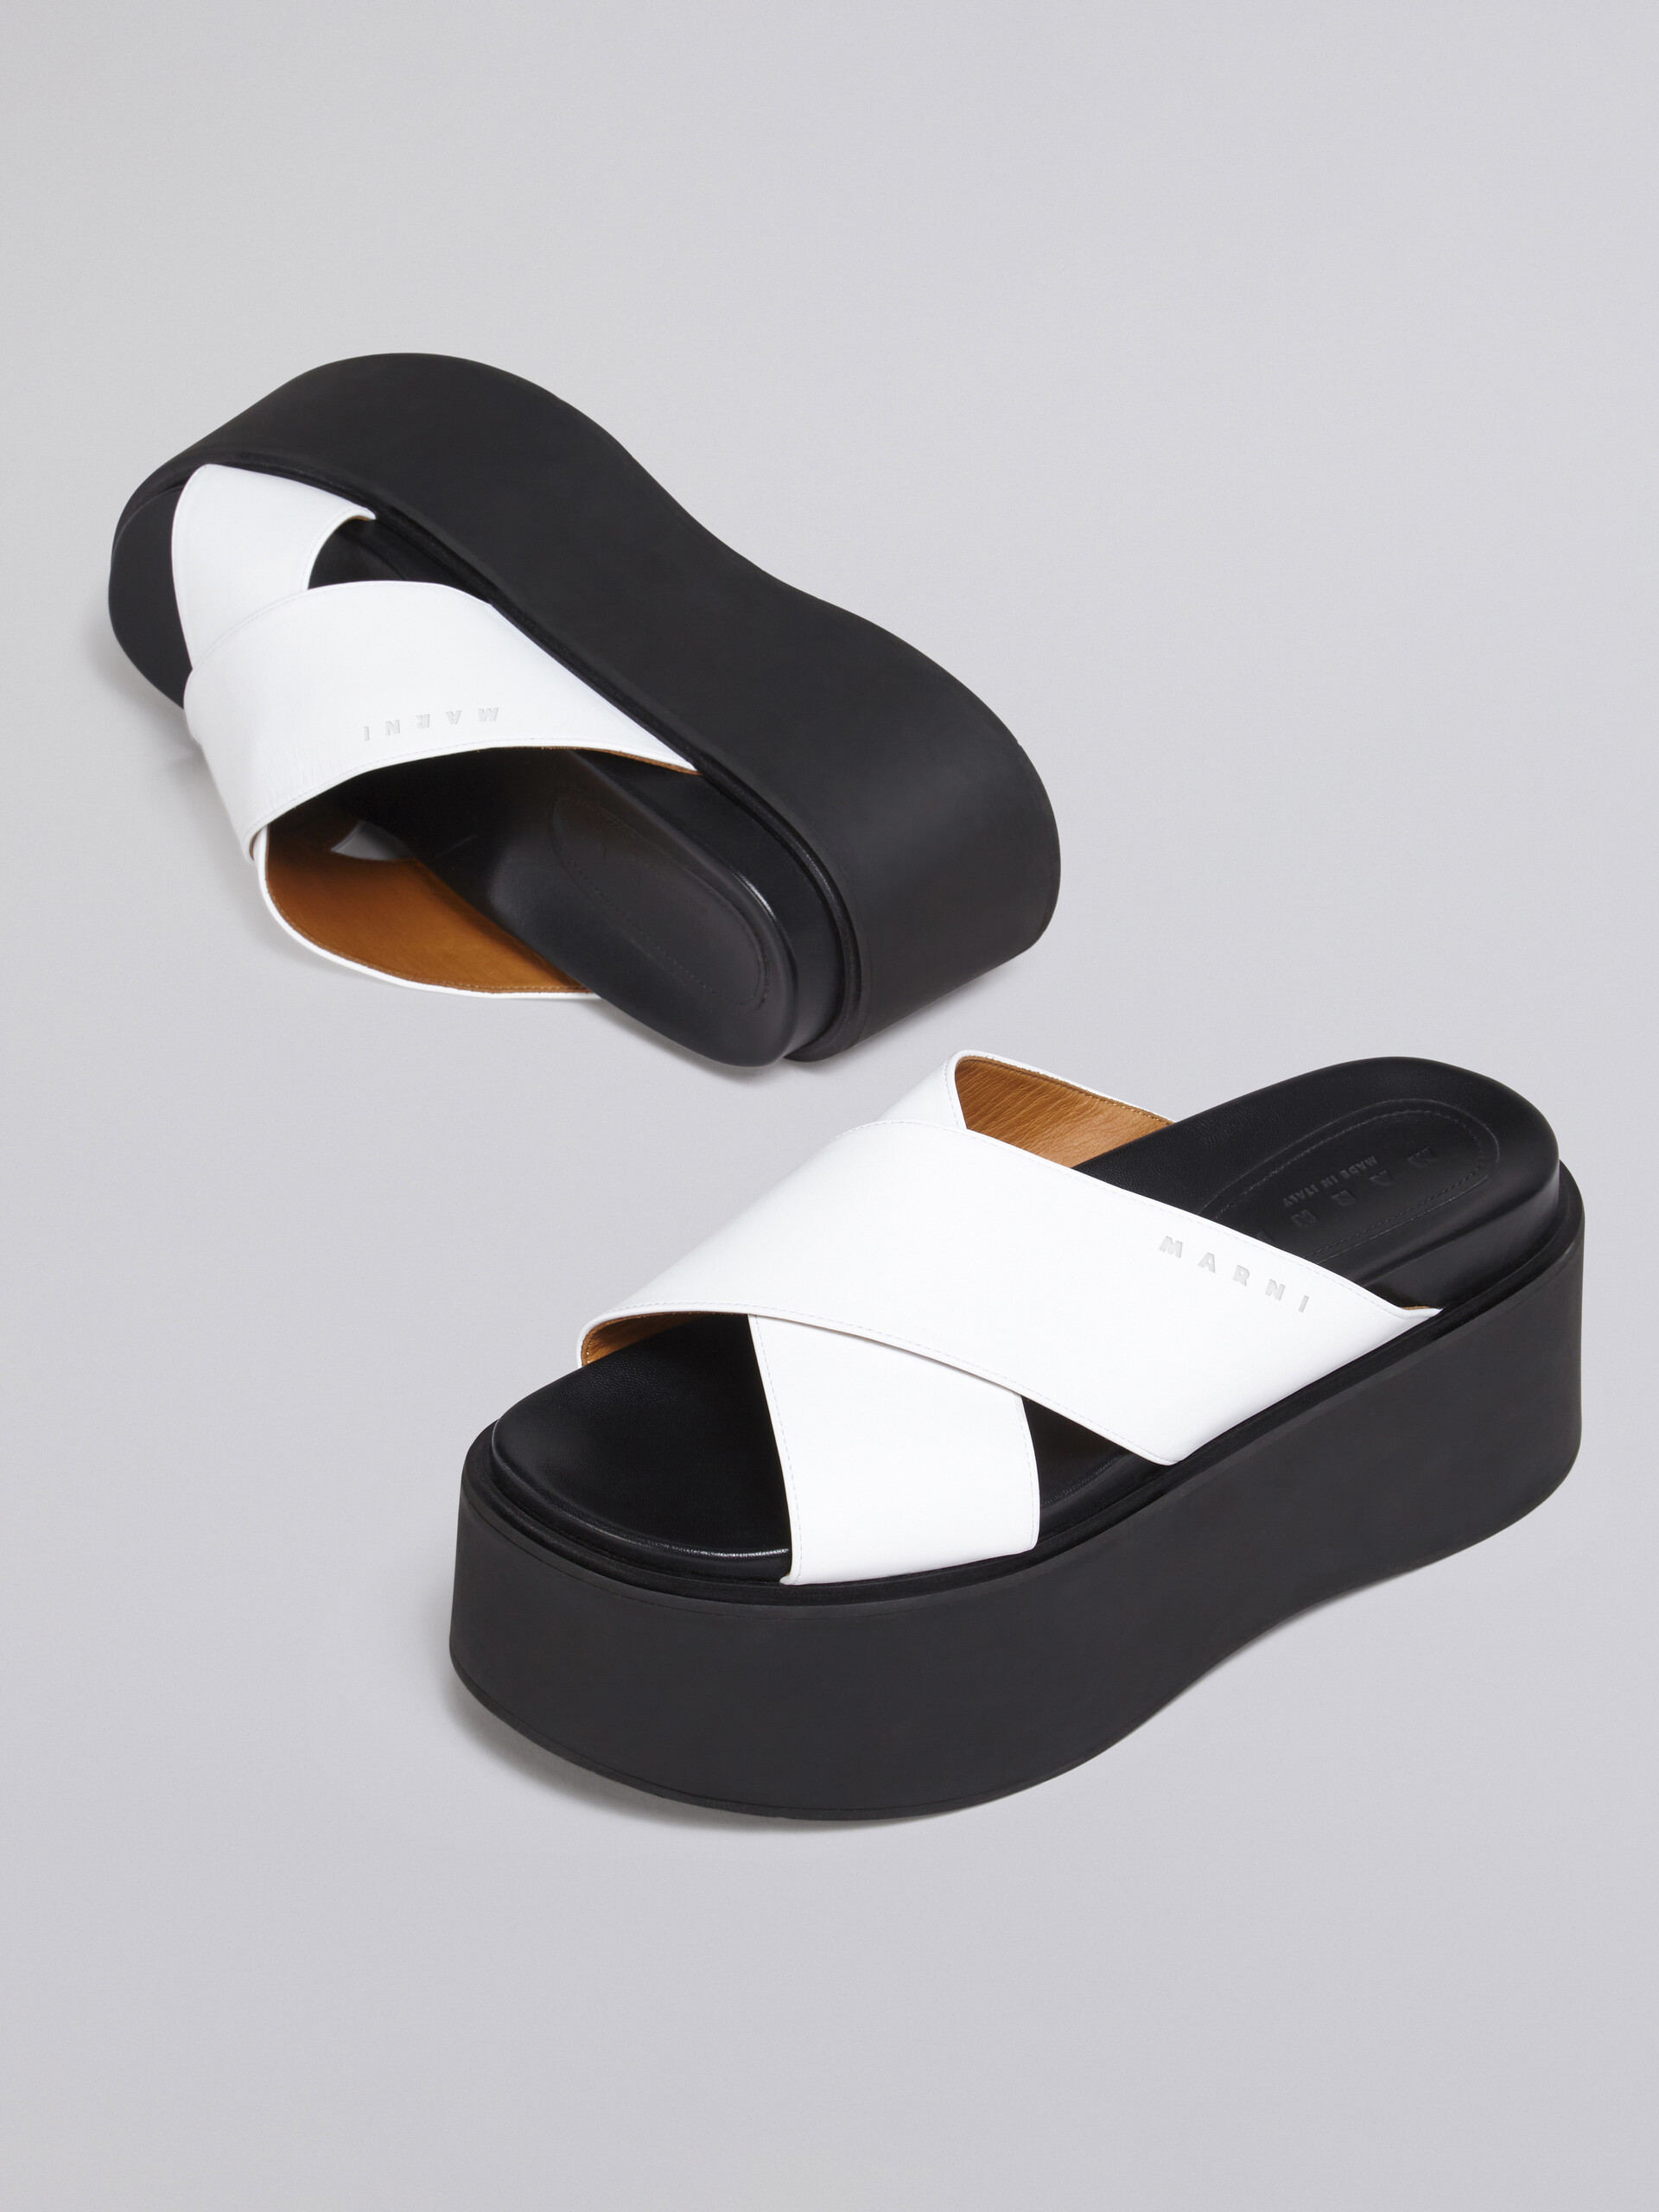 Criss-cross wedge in white calf leather - Sandals - Image 5